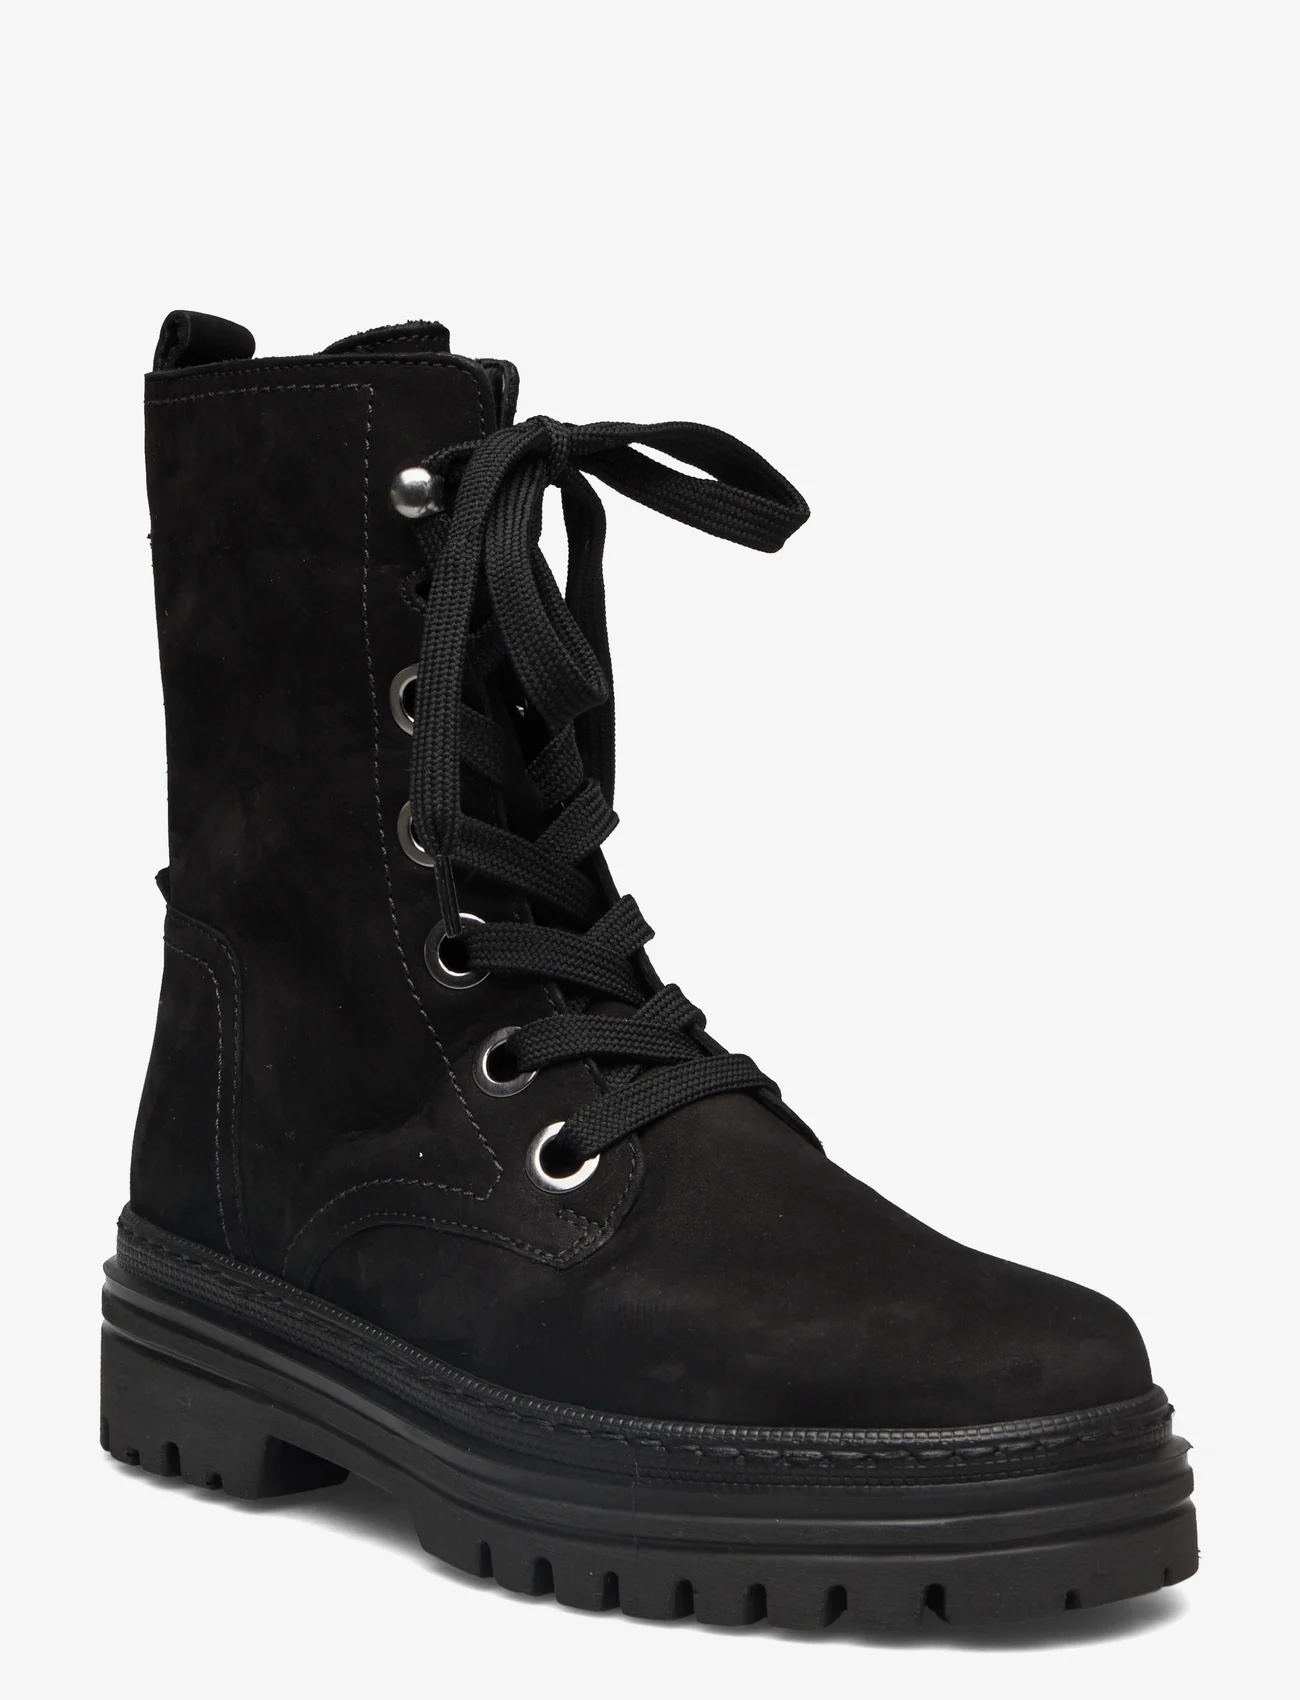 Gabor - Laced ankle boot - laced boots - black - 0